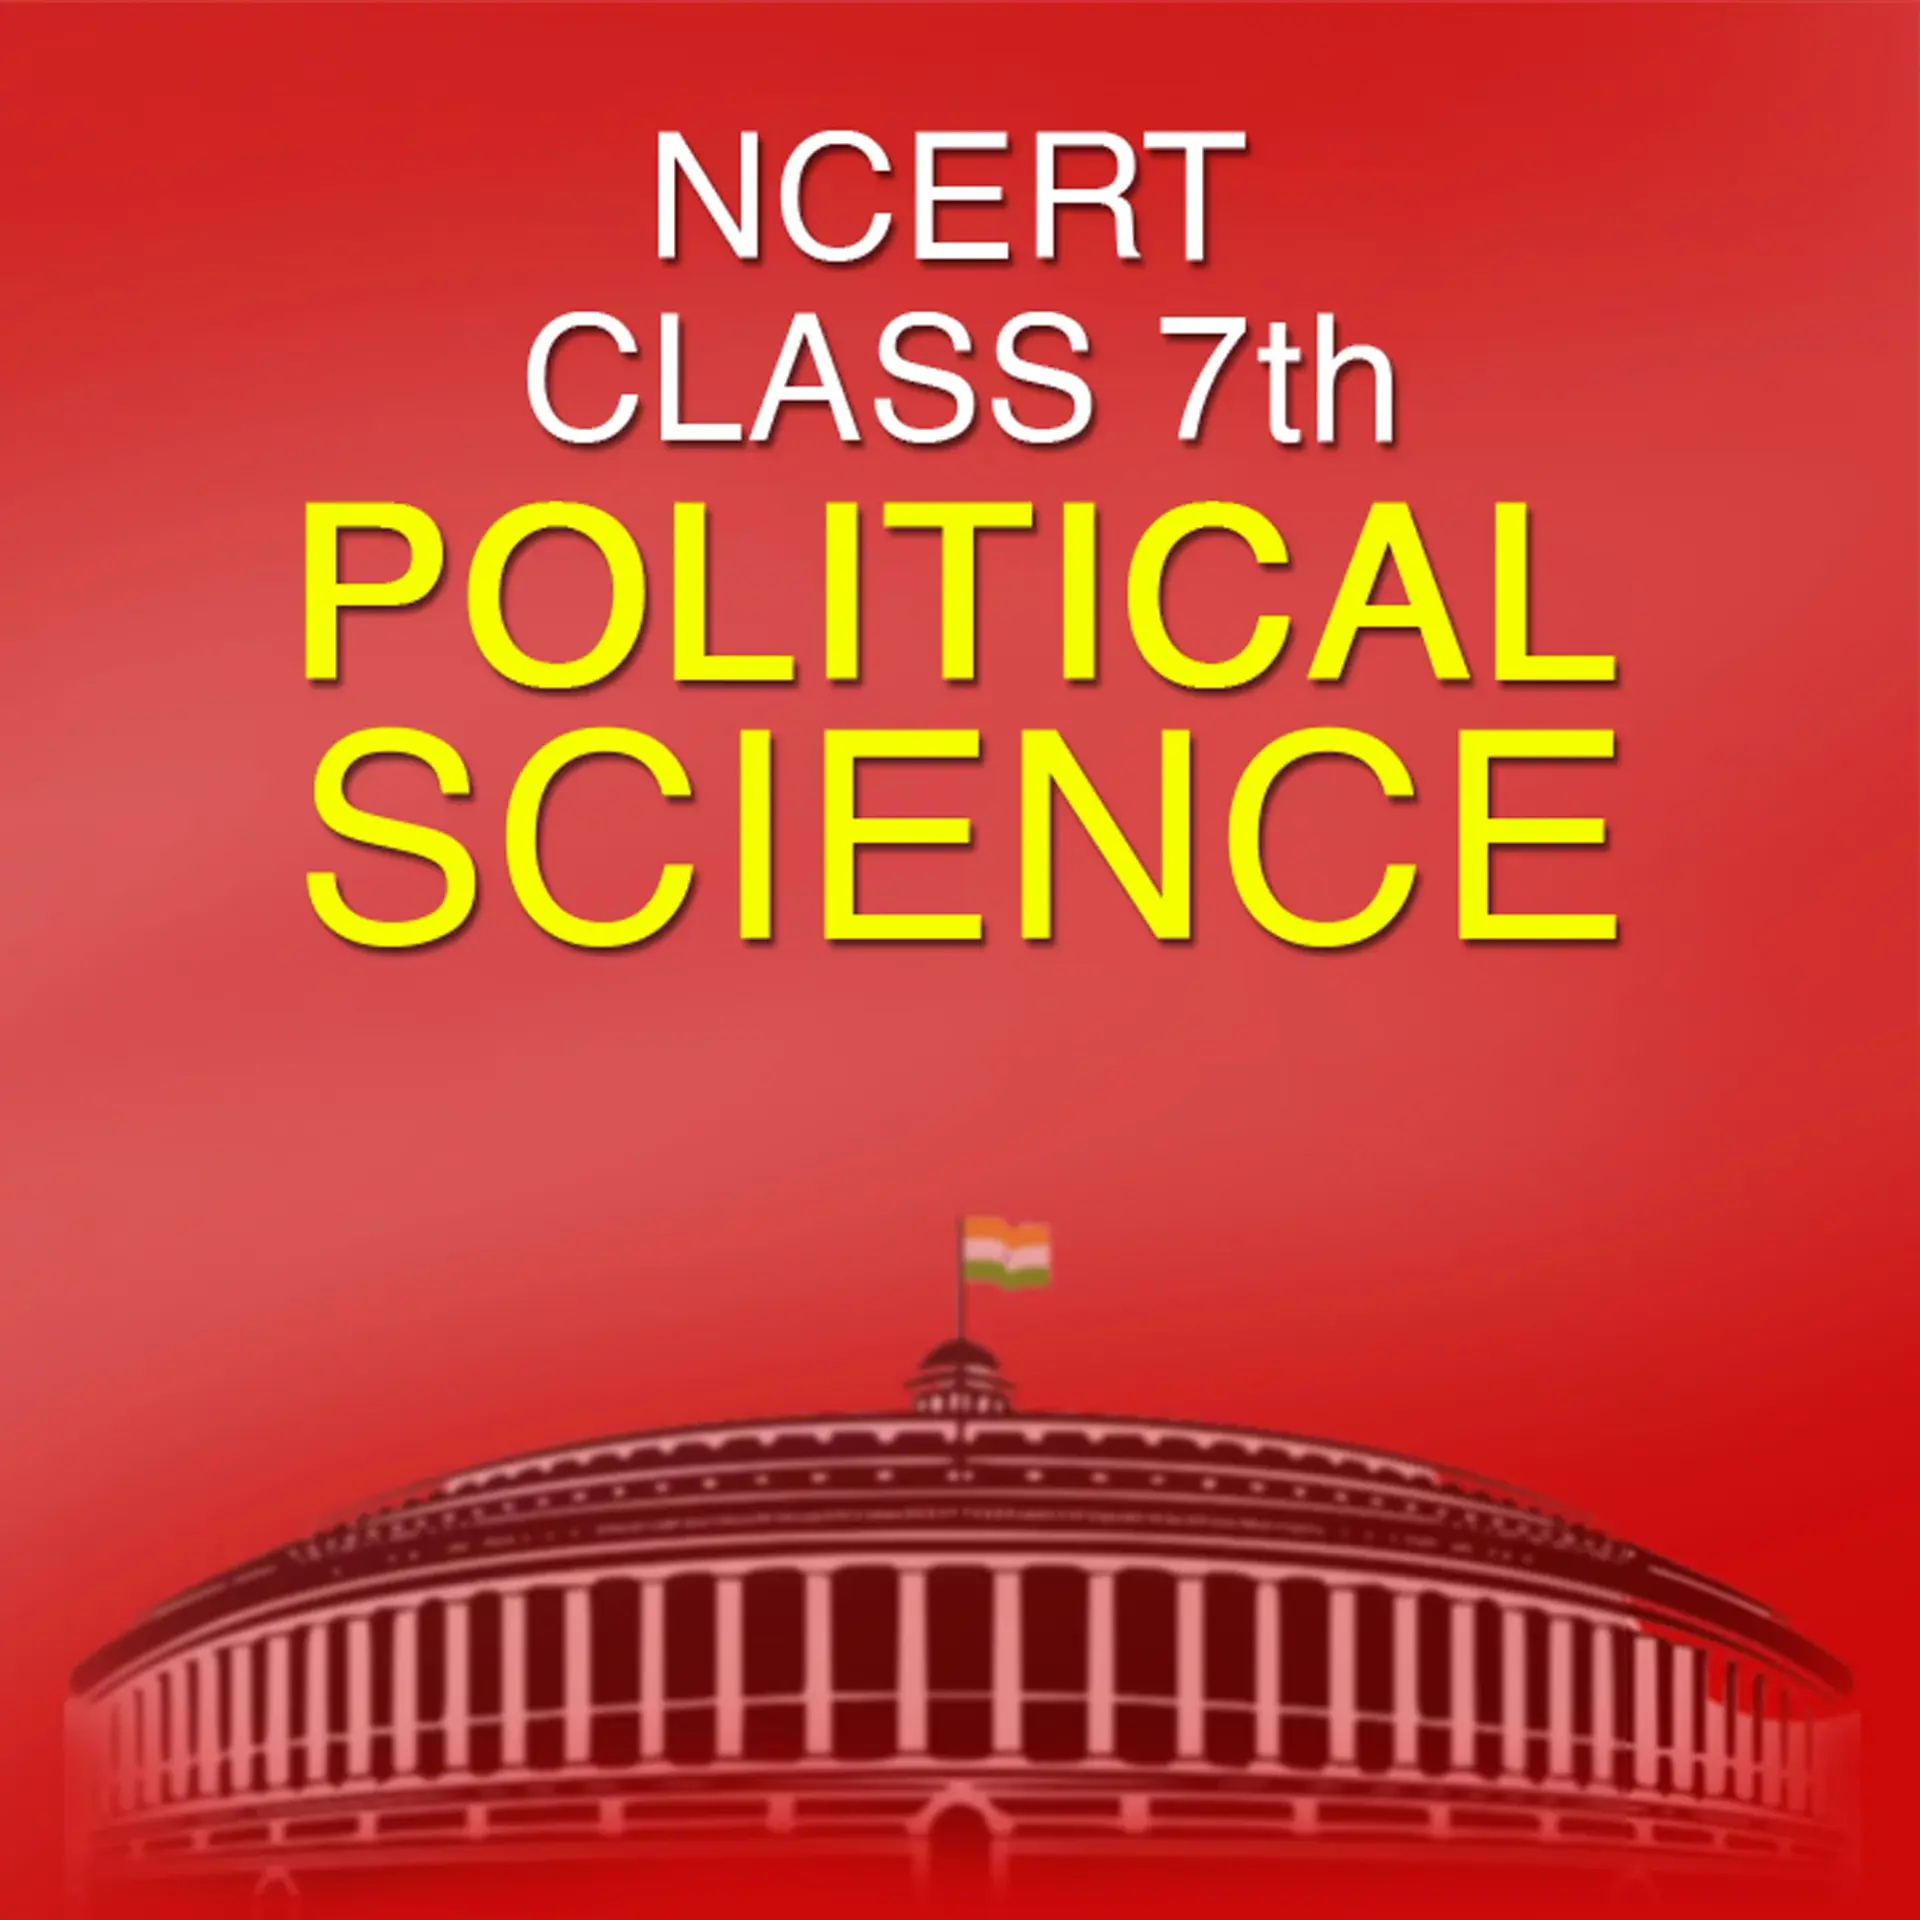 NCERT Class 7th Political Science | 